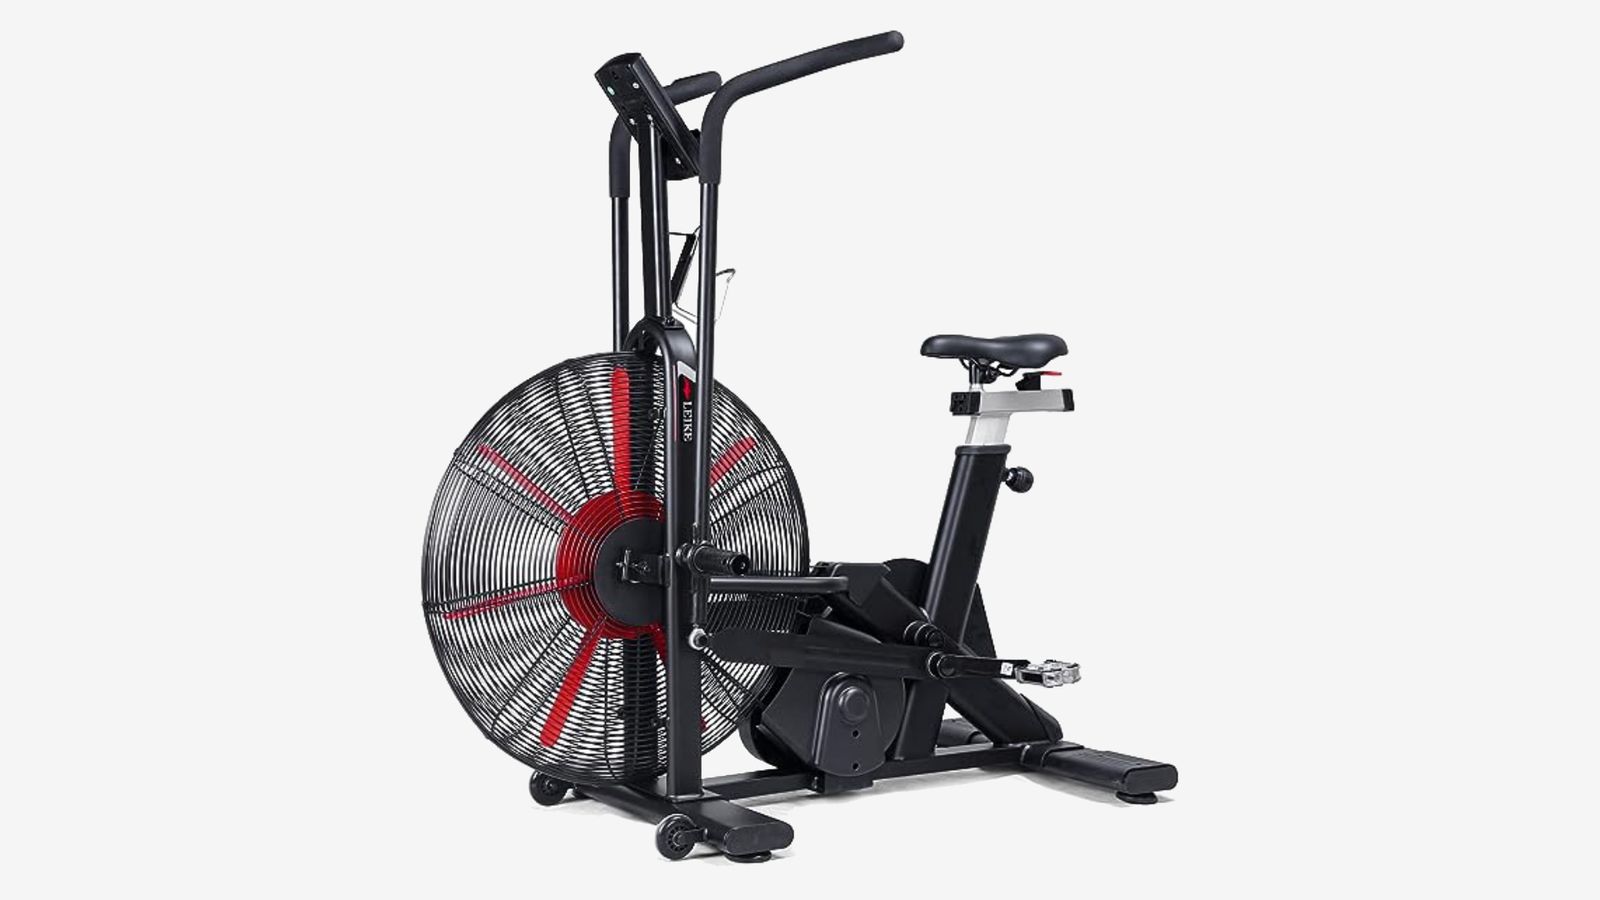 Leikefitness Fan Exercise Bike product image of a black framed bike with red details across the fan.